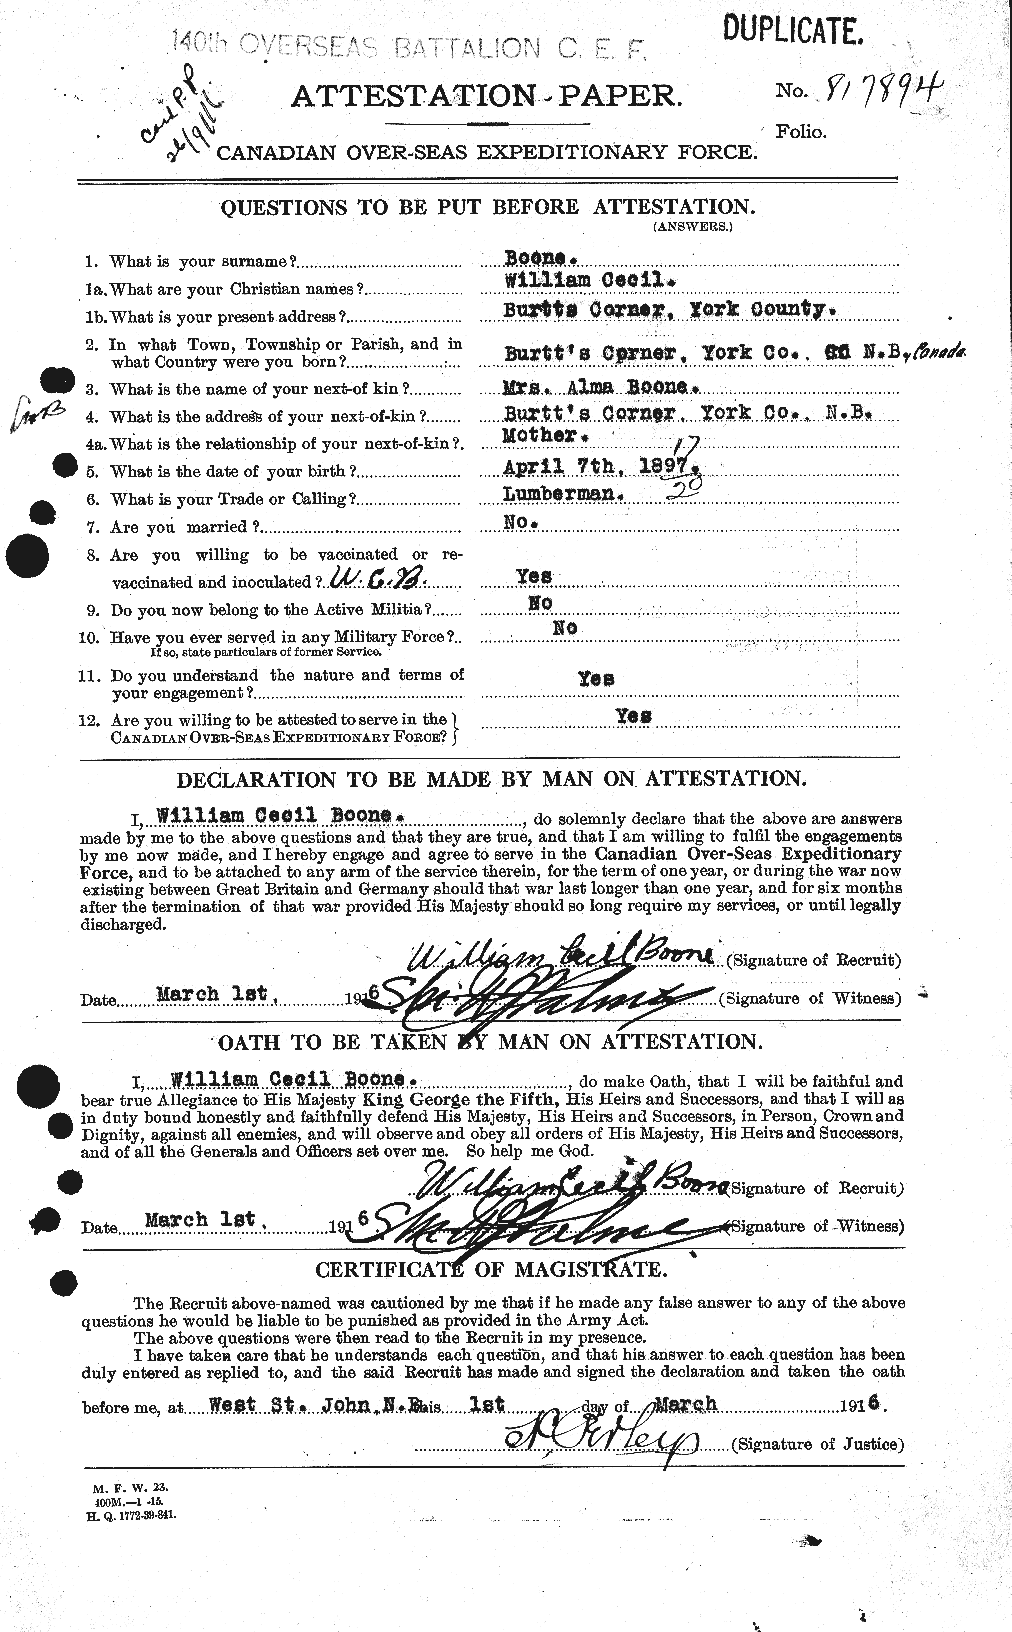 Personnel Records of the First World War - CEF 251357a